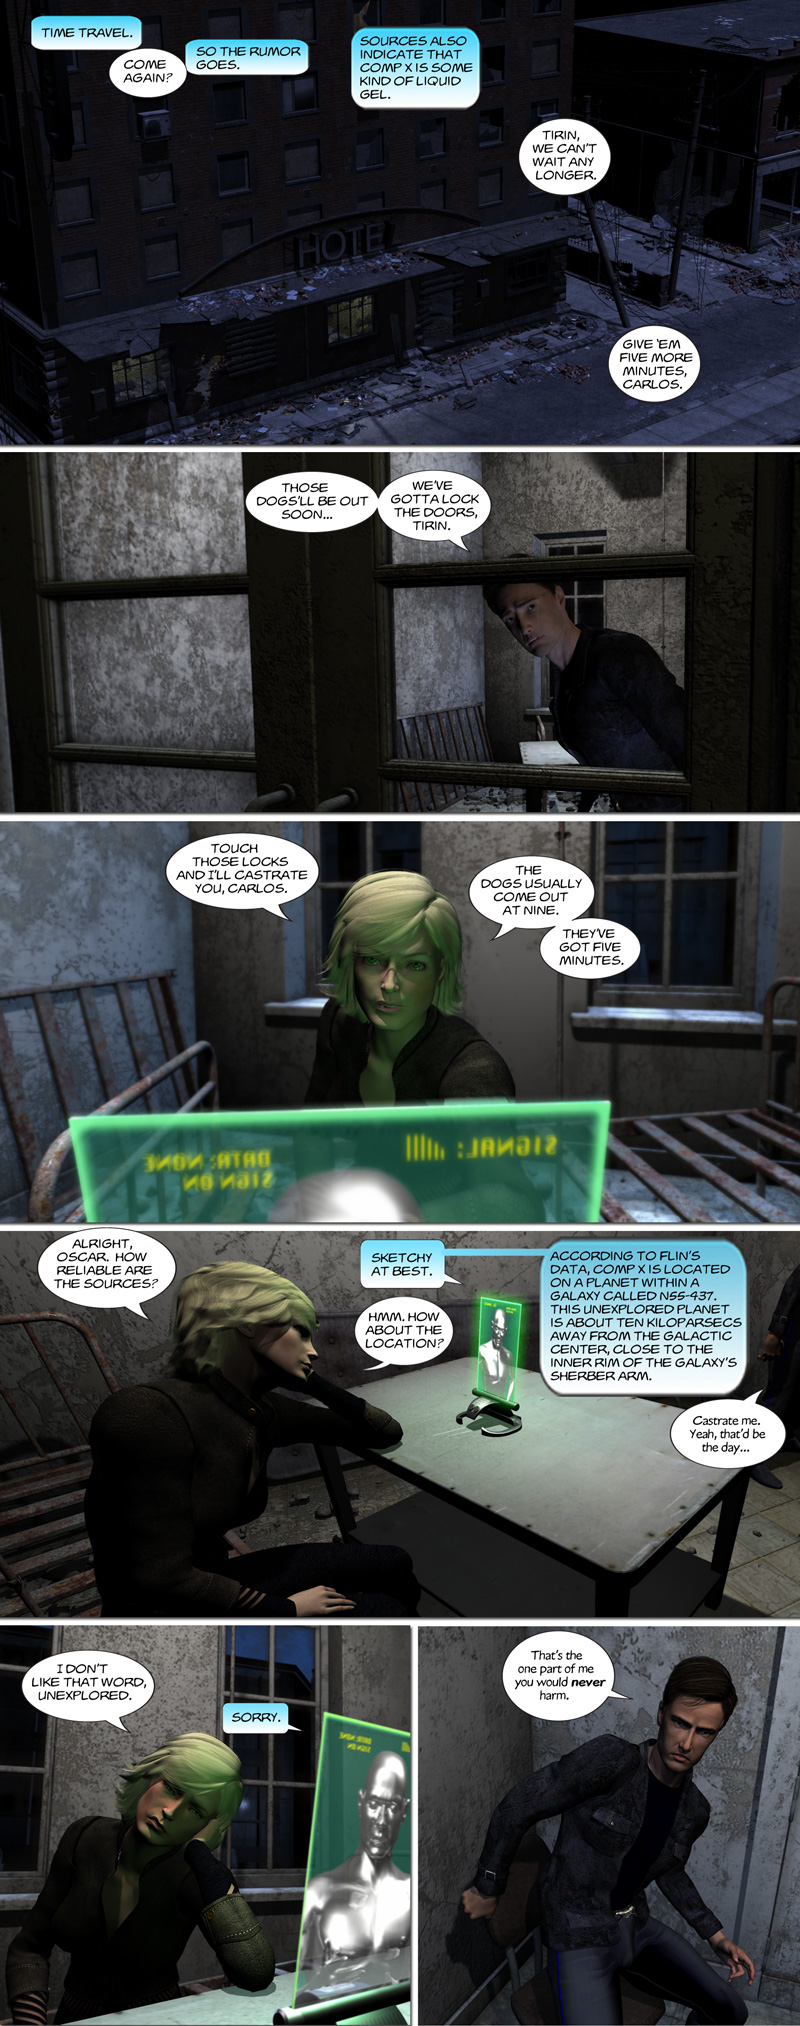 Chapter 8, page 11 – Comp X and time travel.  Say what?